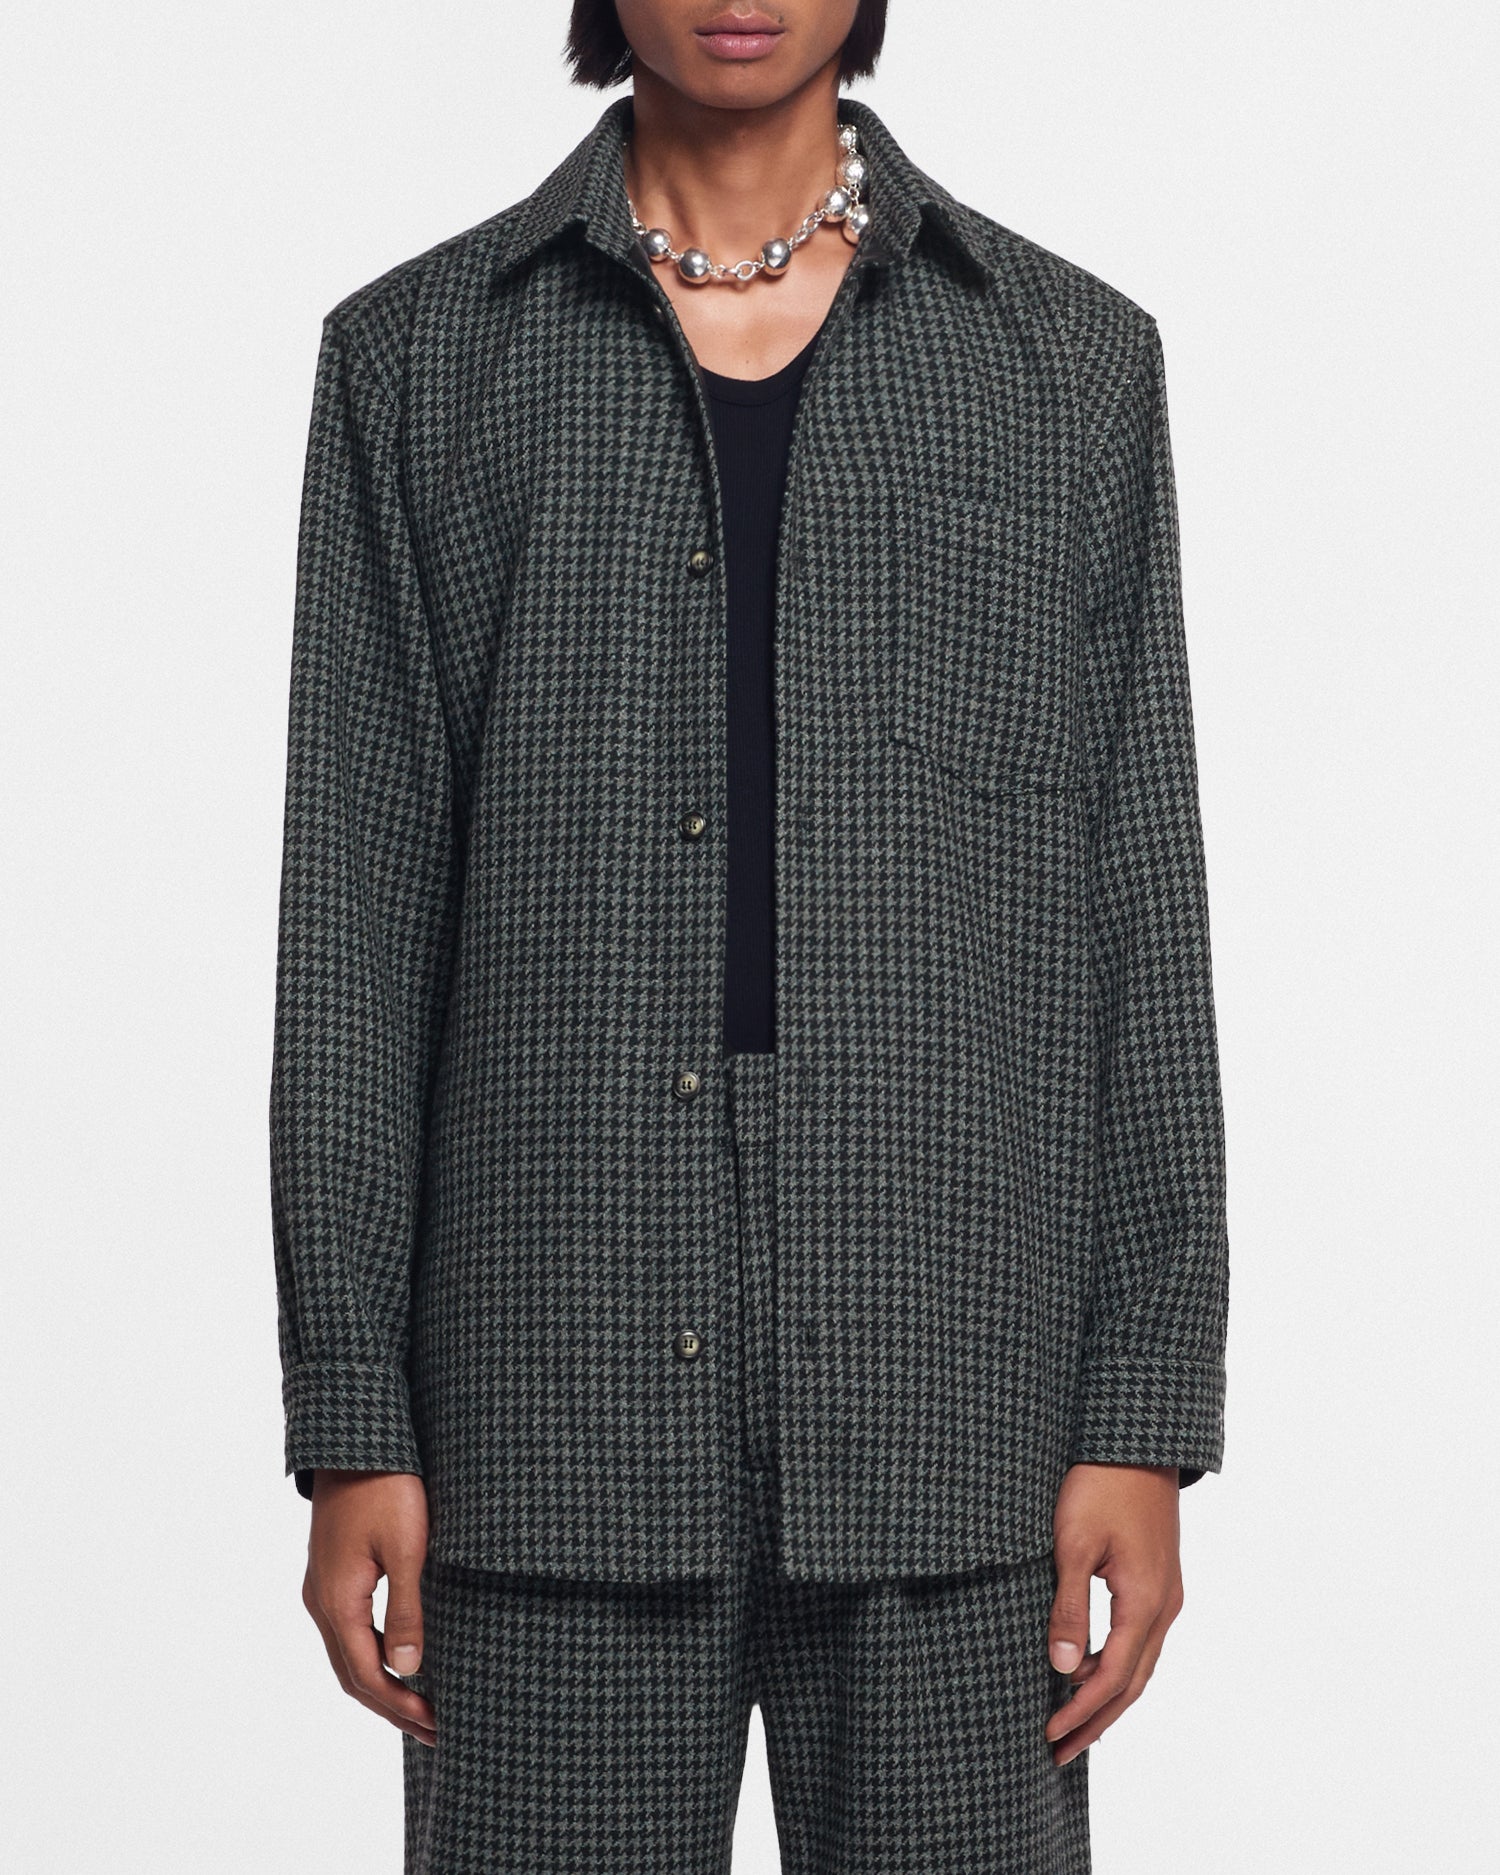 Matize - Archive Houndstooth Wool Shirt - Grey Black Houndstooth